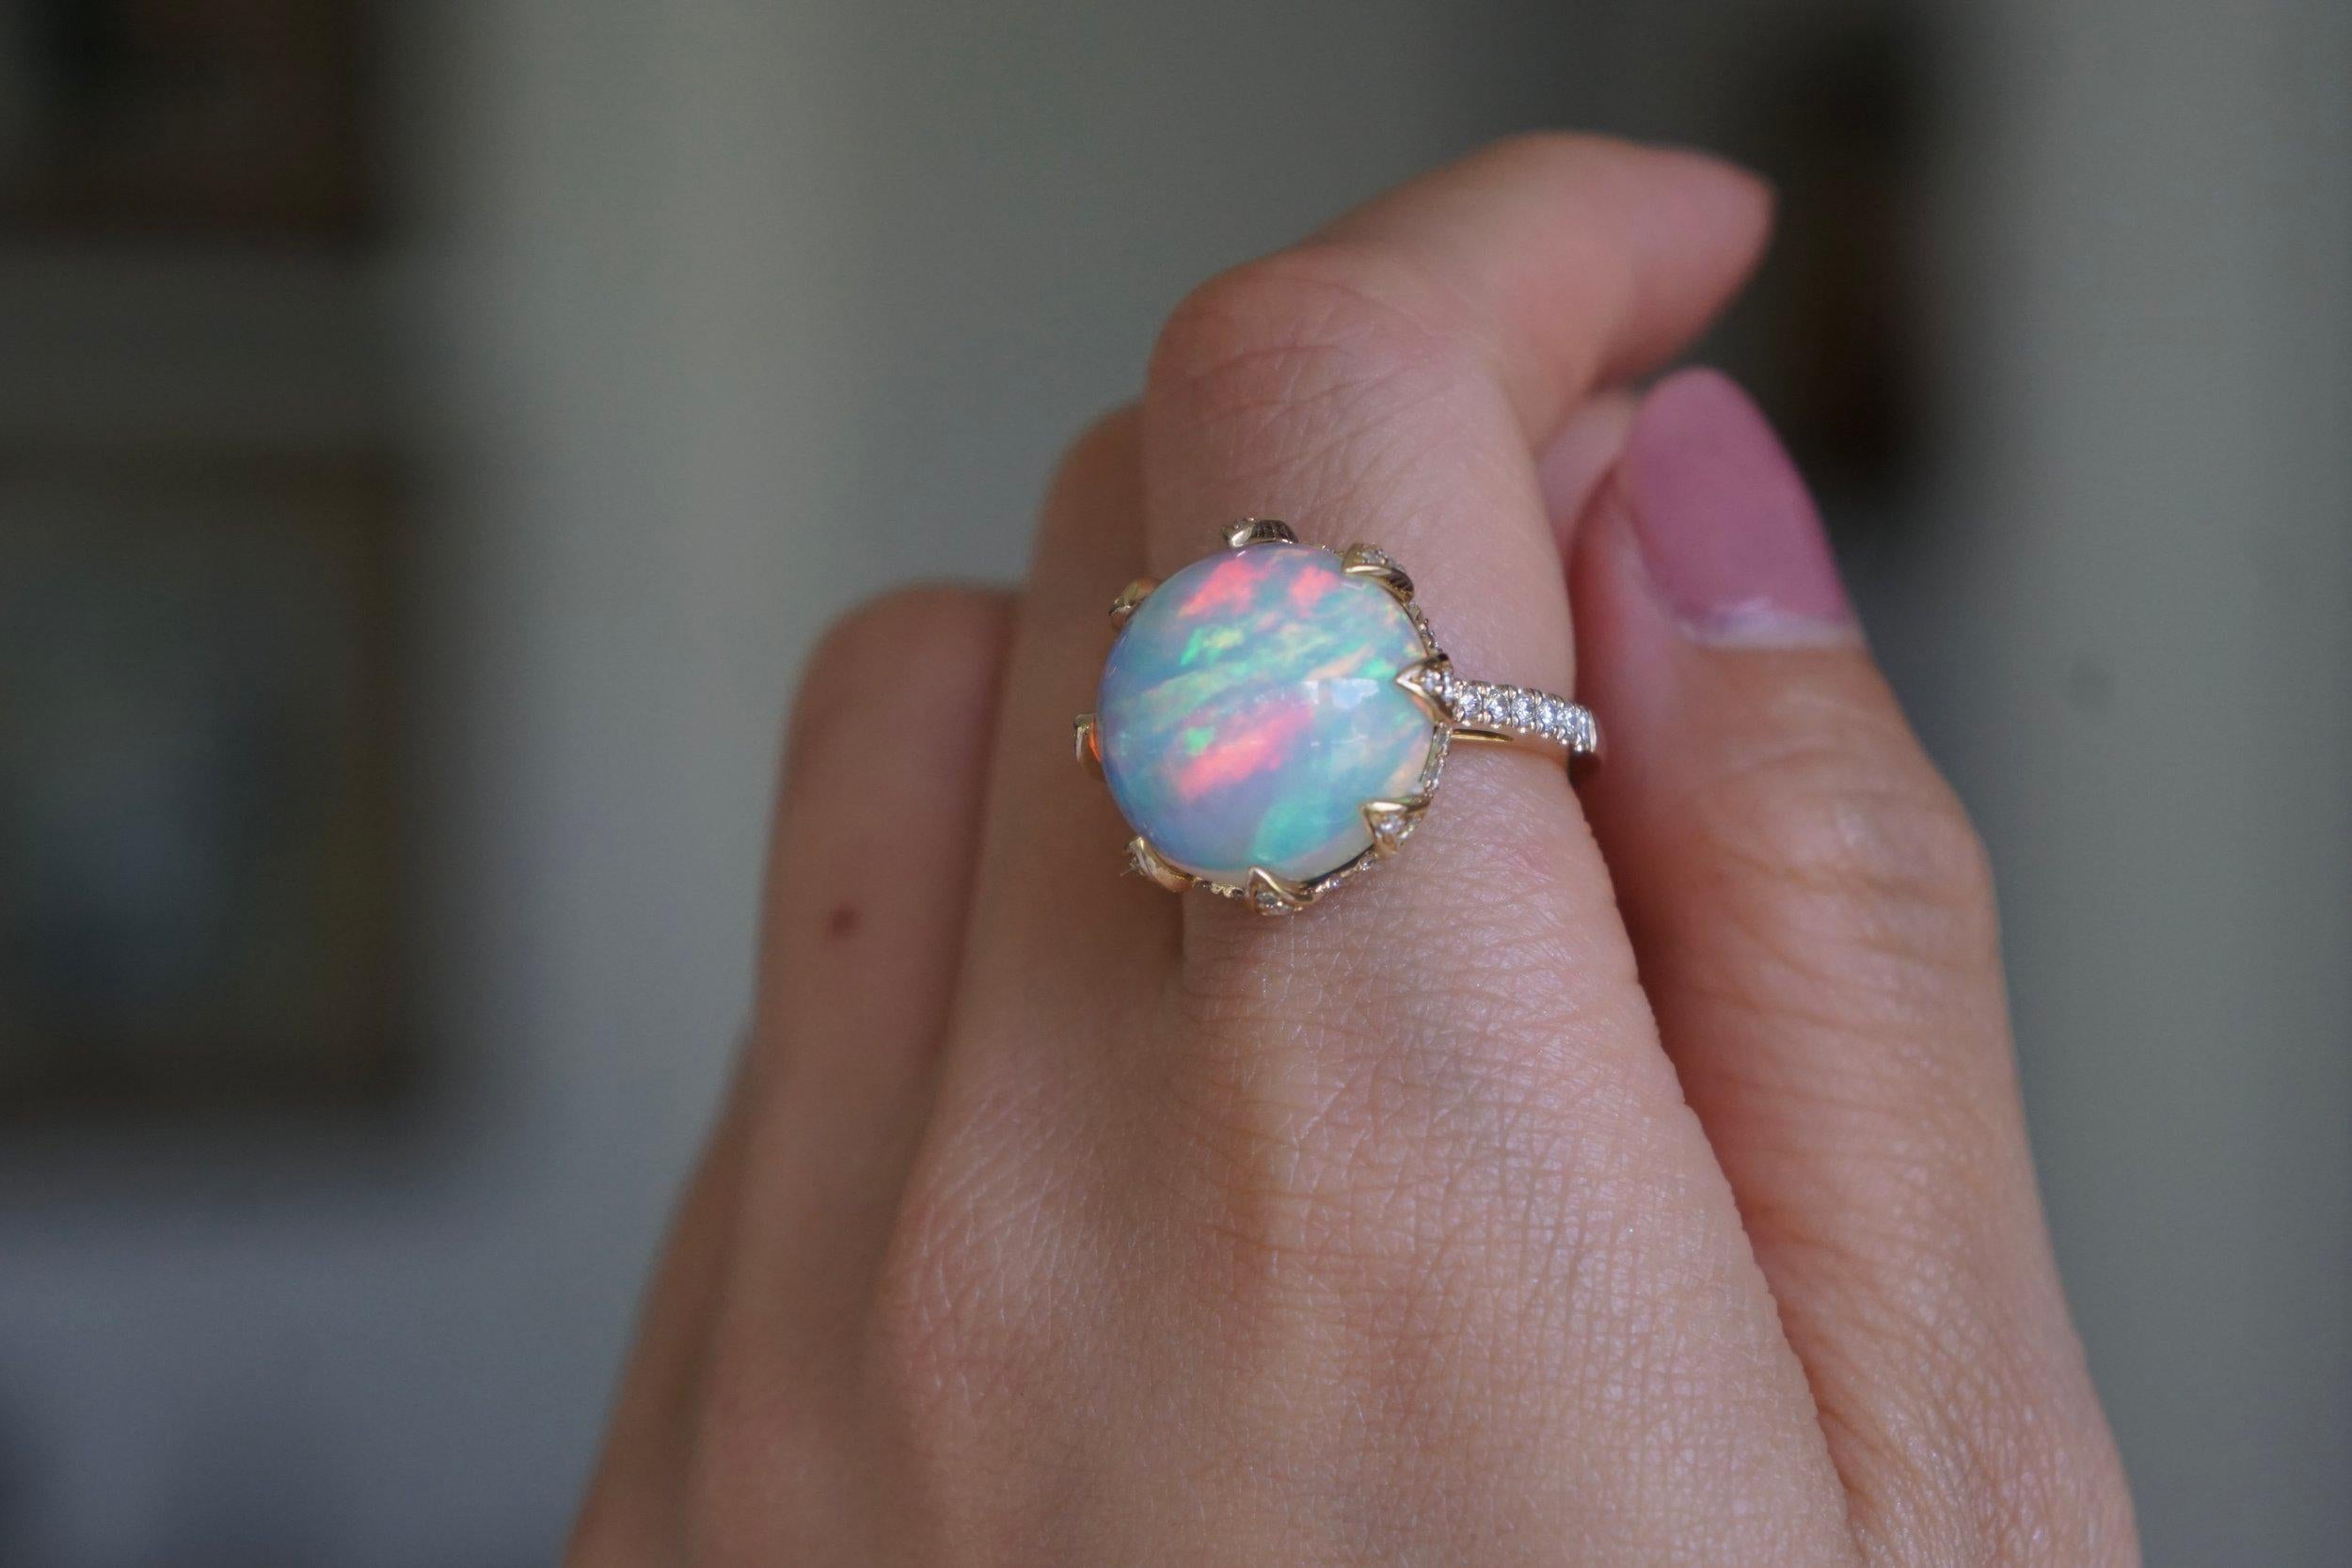 Brilliant Cut Mega Round Opal and Diamond Lotus Ring - Noteworthy Large Opal - 10 ct For Sale